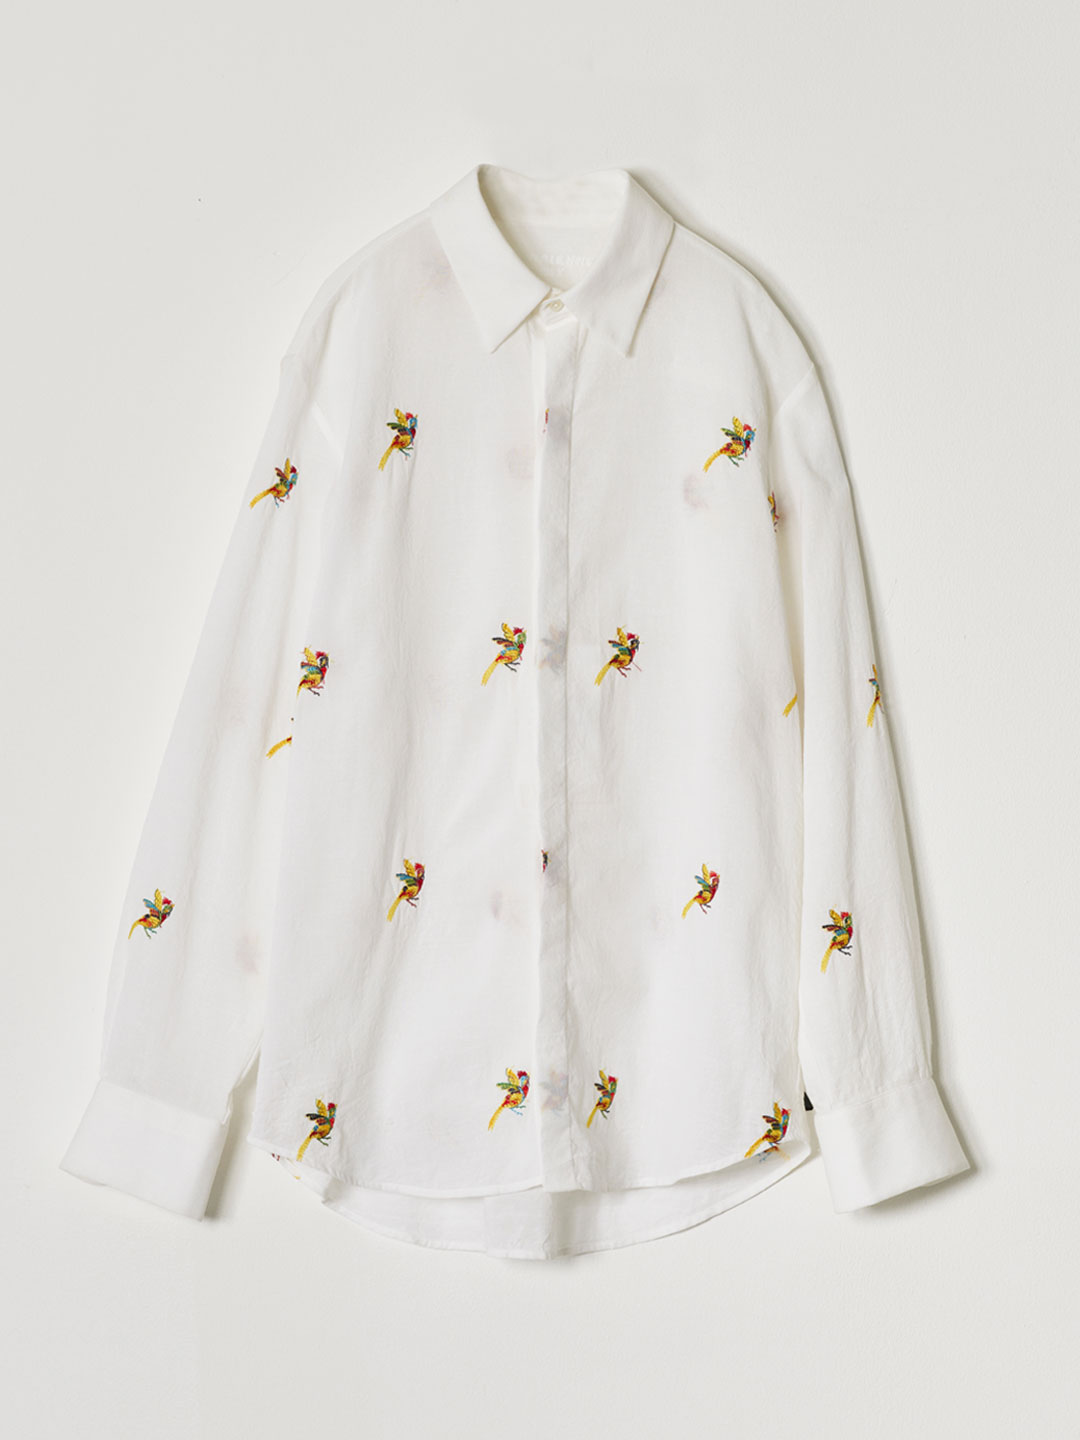 AUTHENTIQUE Embroidery Linen Blended Shirt - White